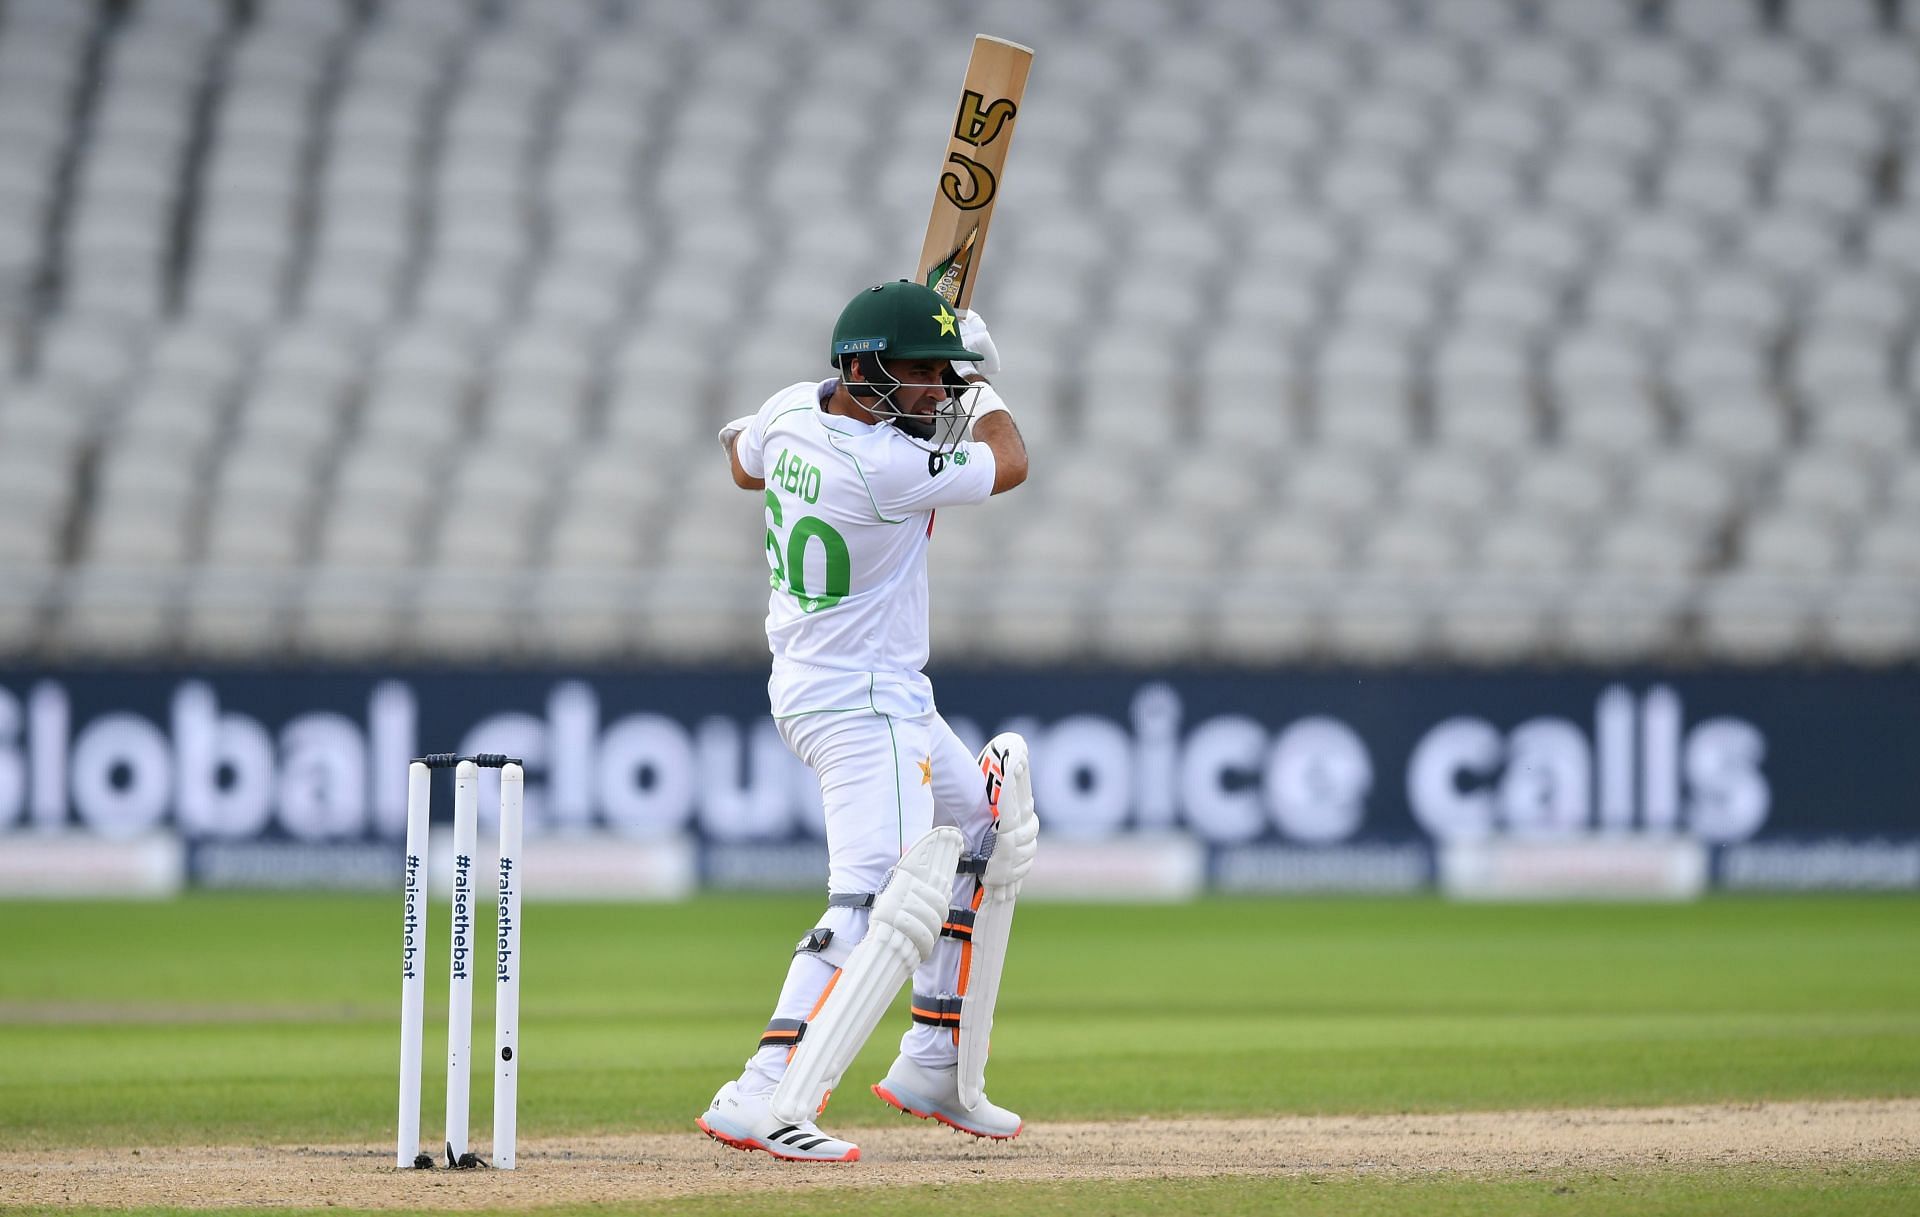 Abid Ali starred as Pakistan register a convincing victory against Bangladesh (Credit: Getty Images)